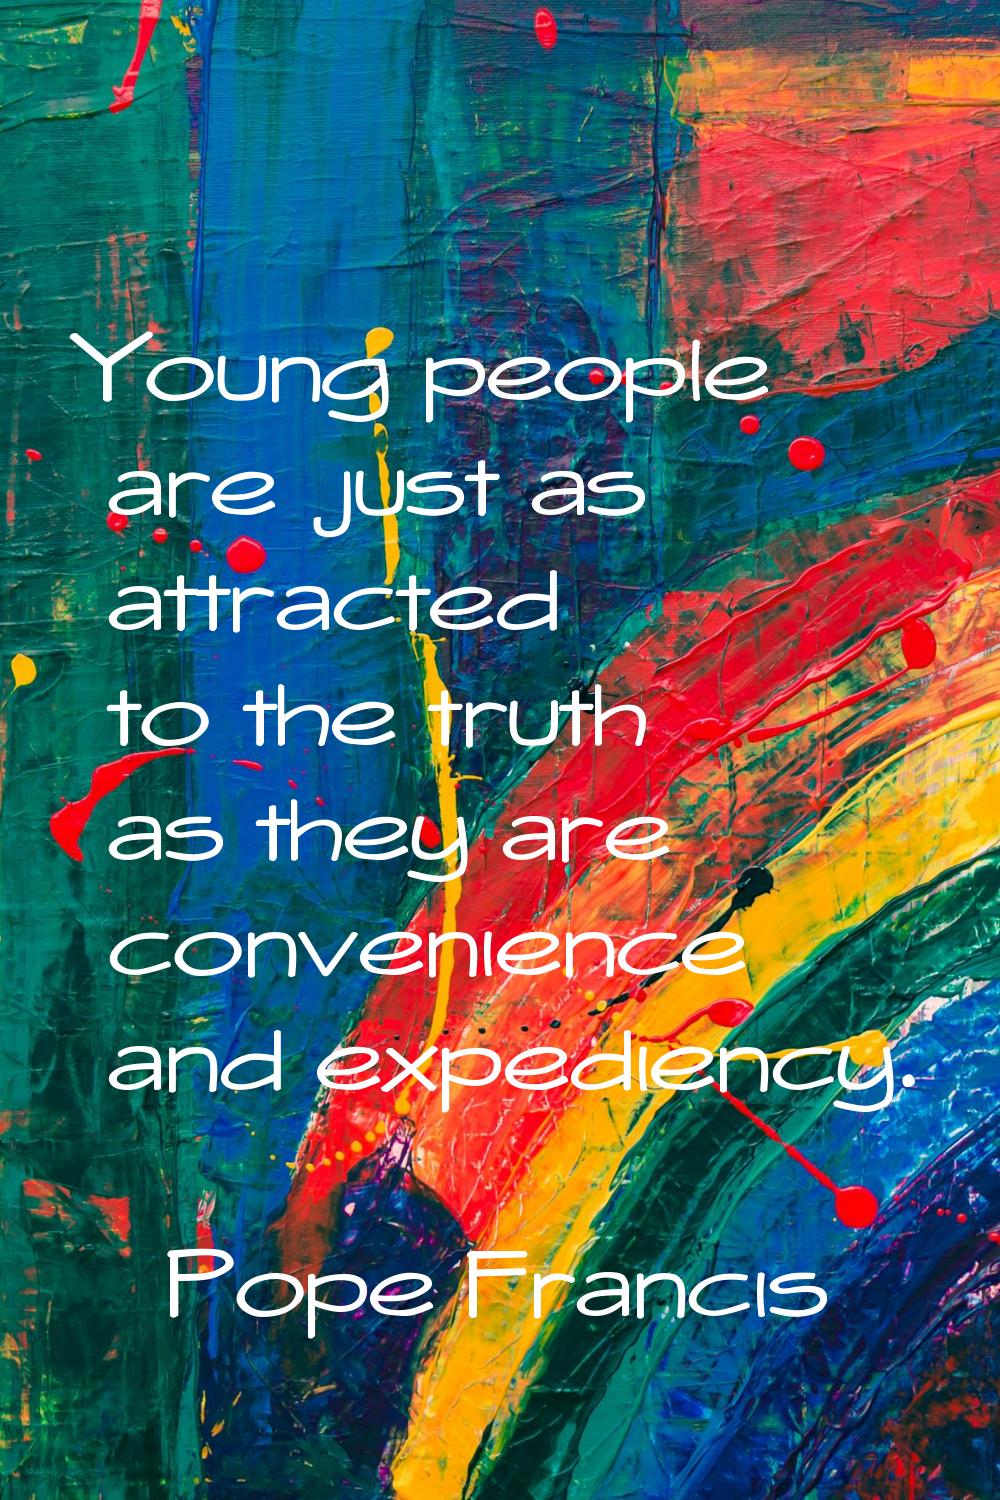 Young people are just as attracted to the truth as they are convenience and expediency.